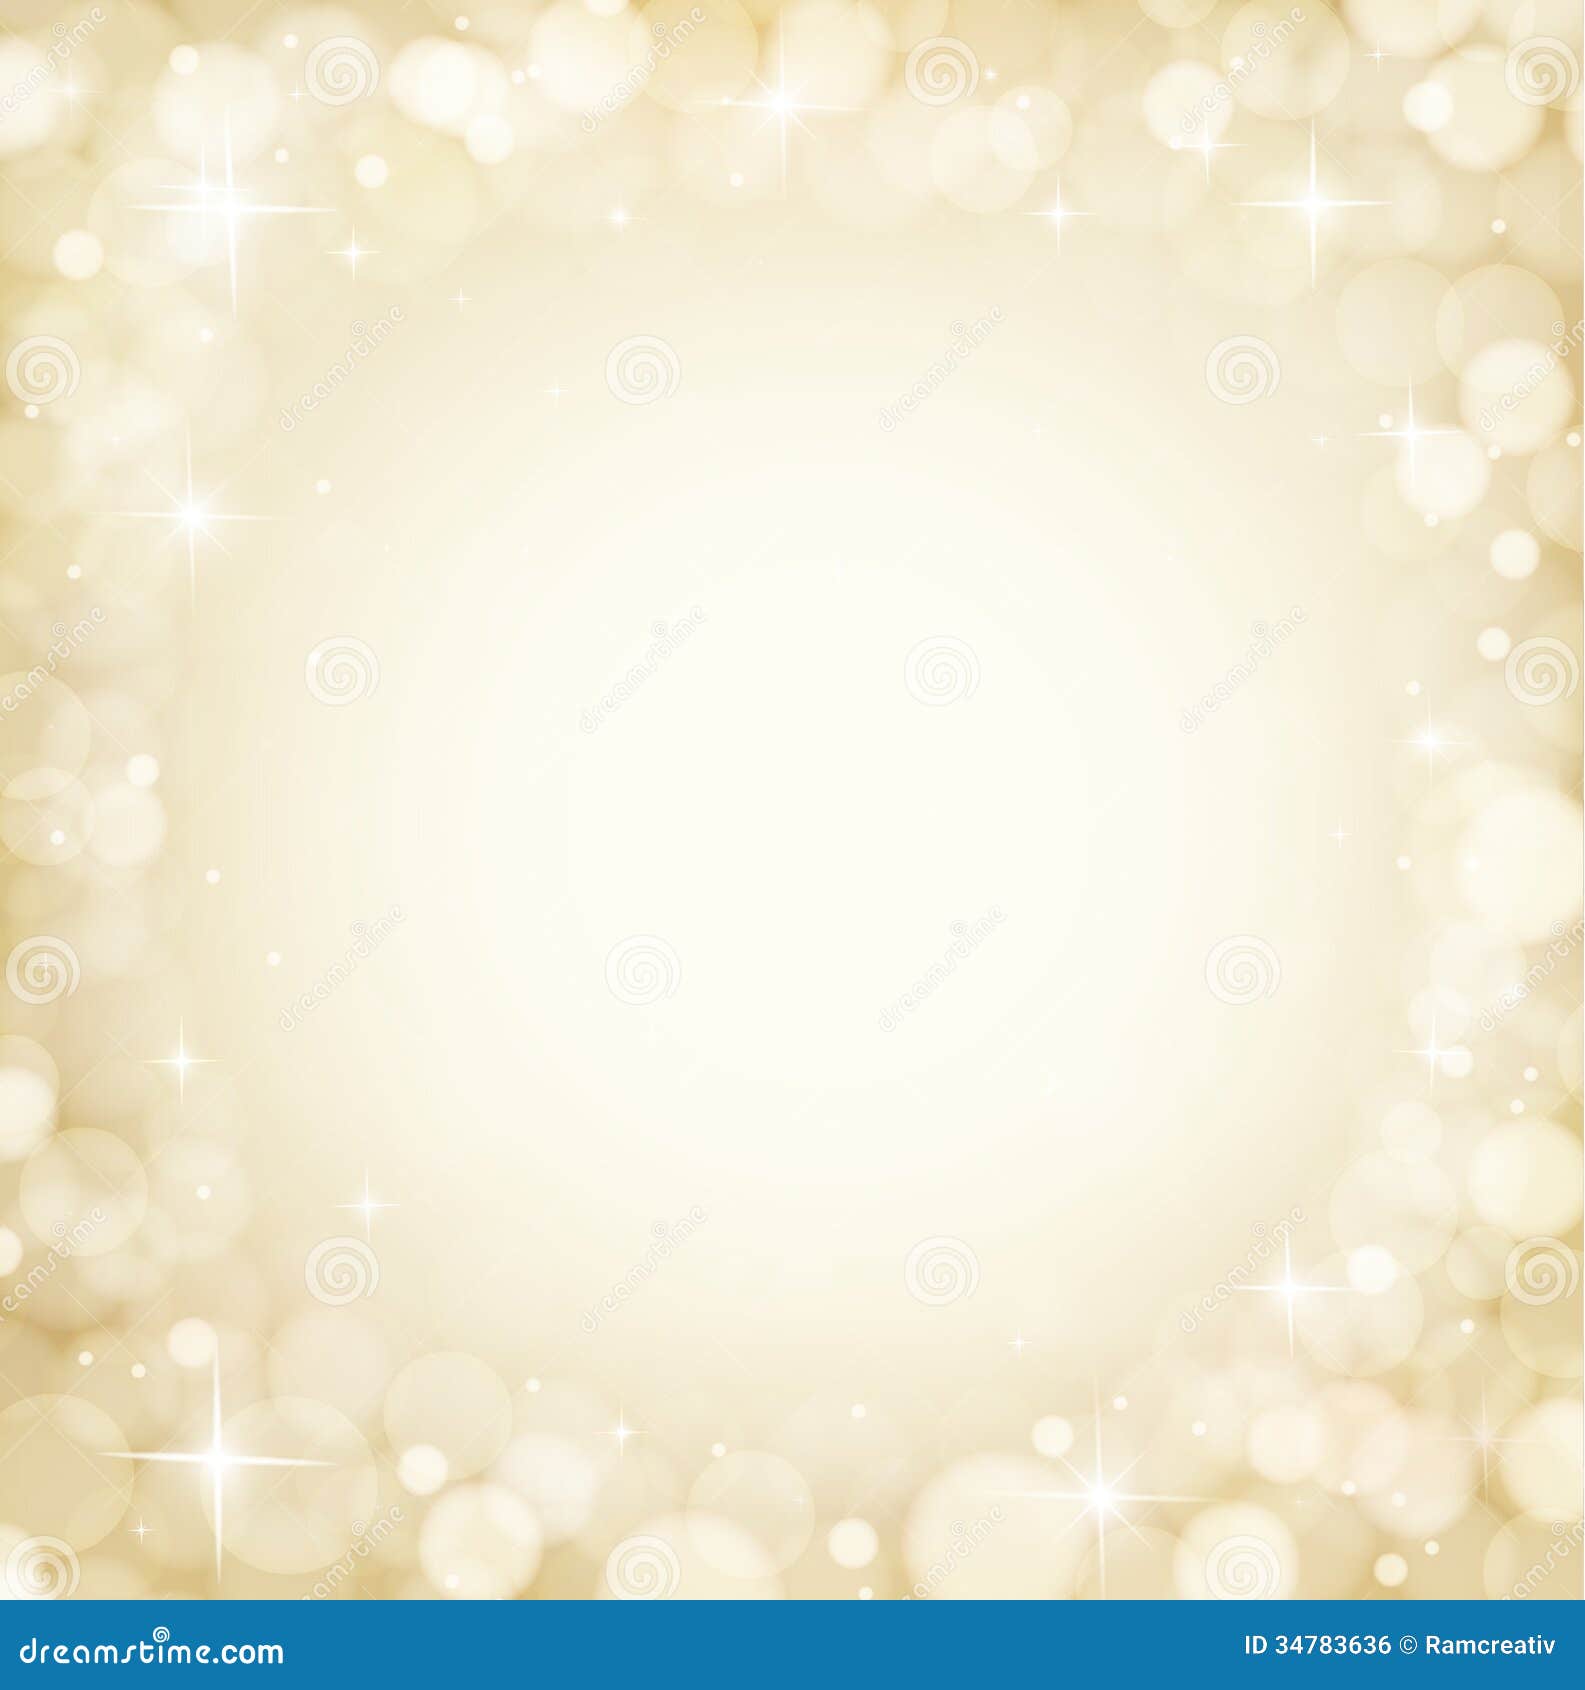 Abstract Golden Background Royalty Free Stock Image 